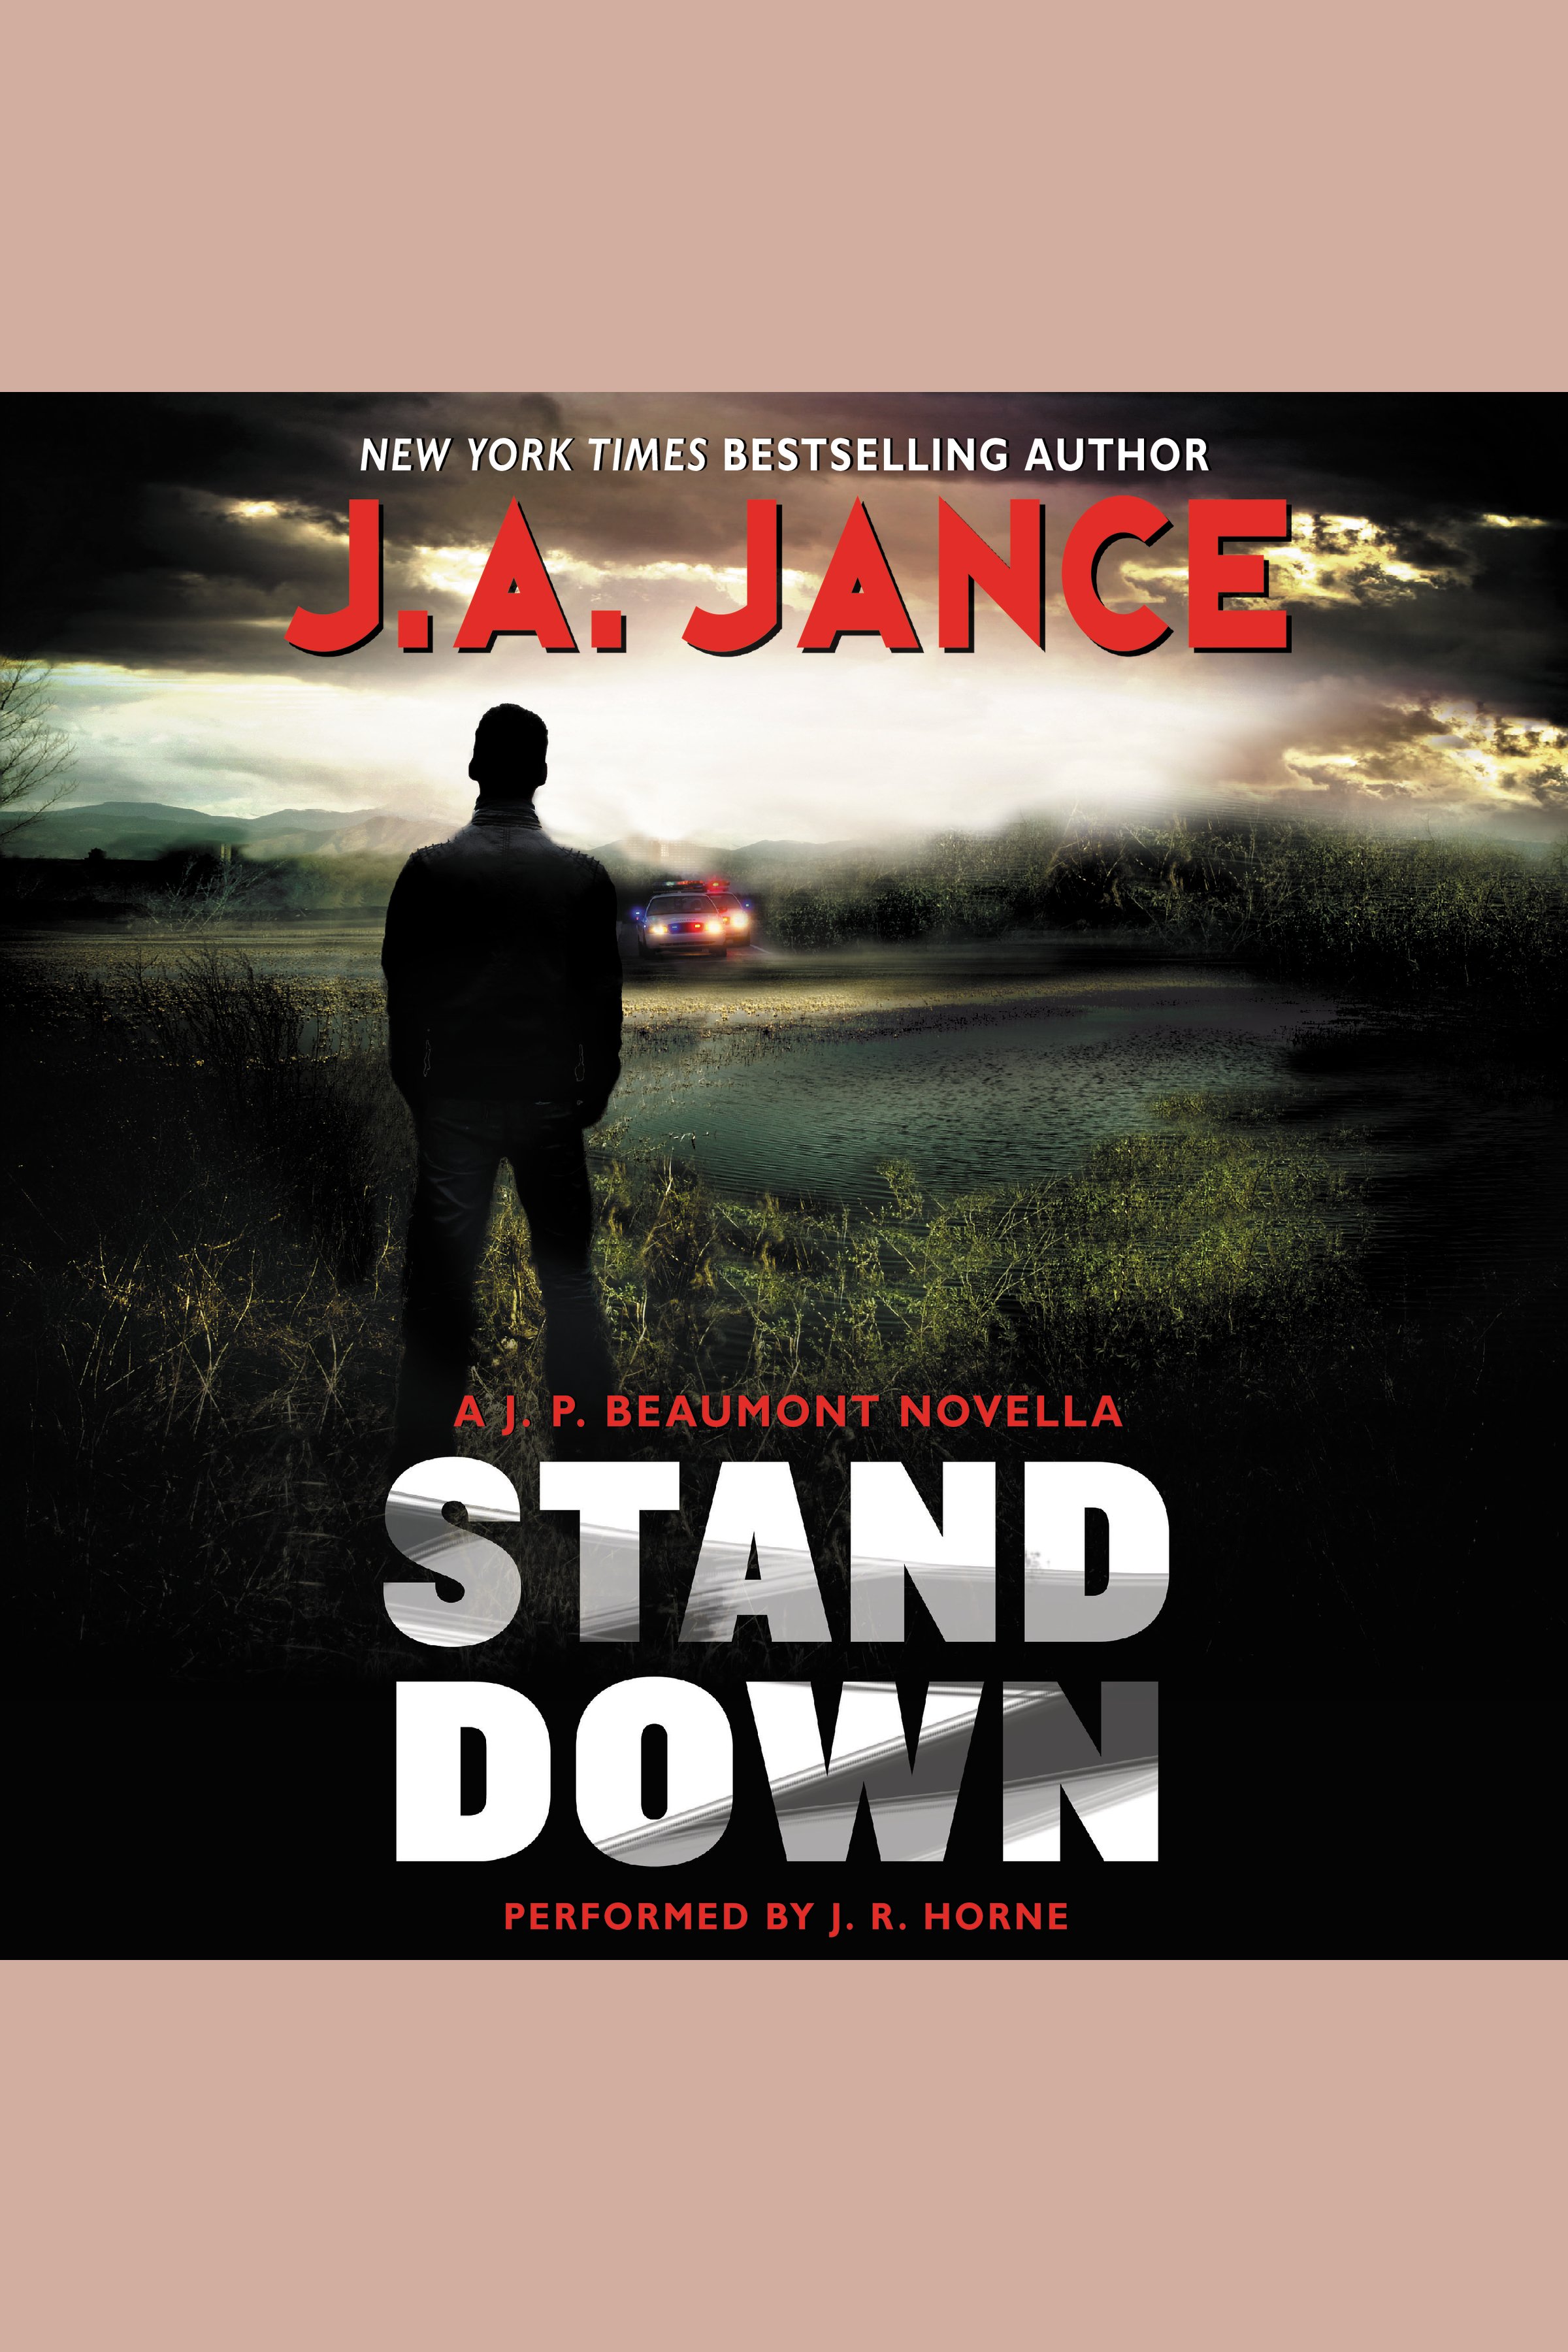 Stand down A J.P. Beaumont Novella cover image